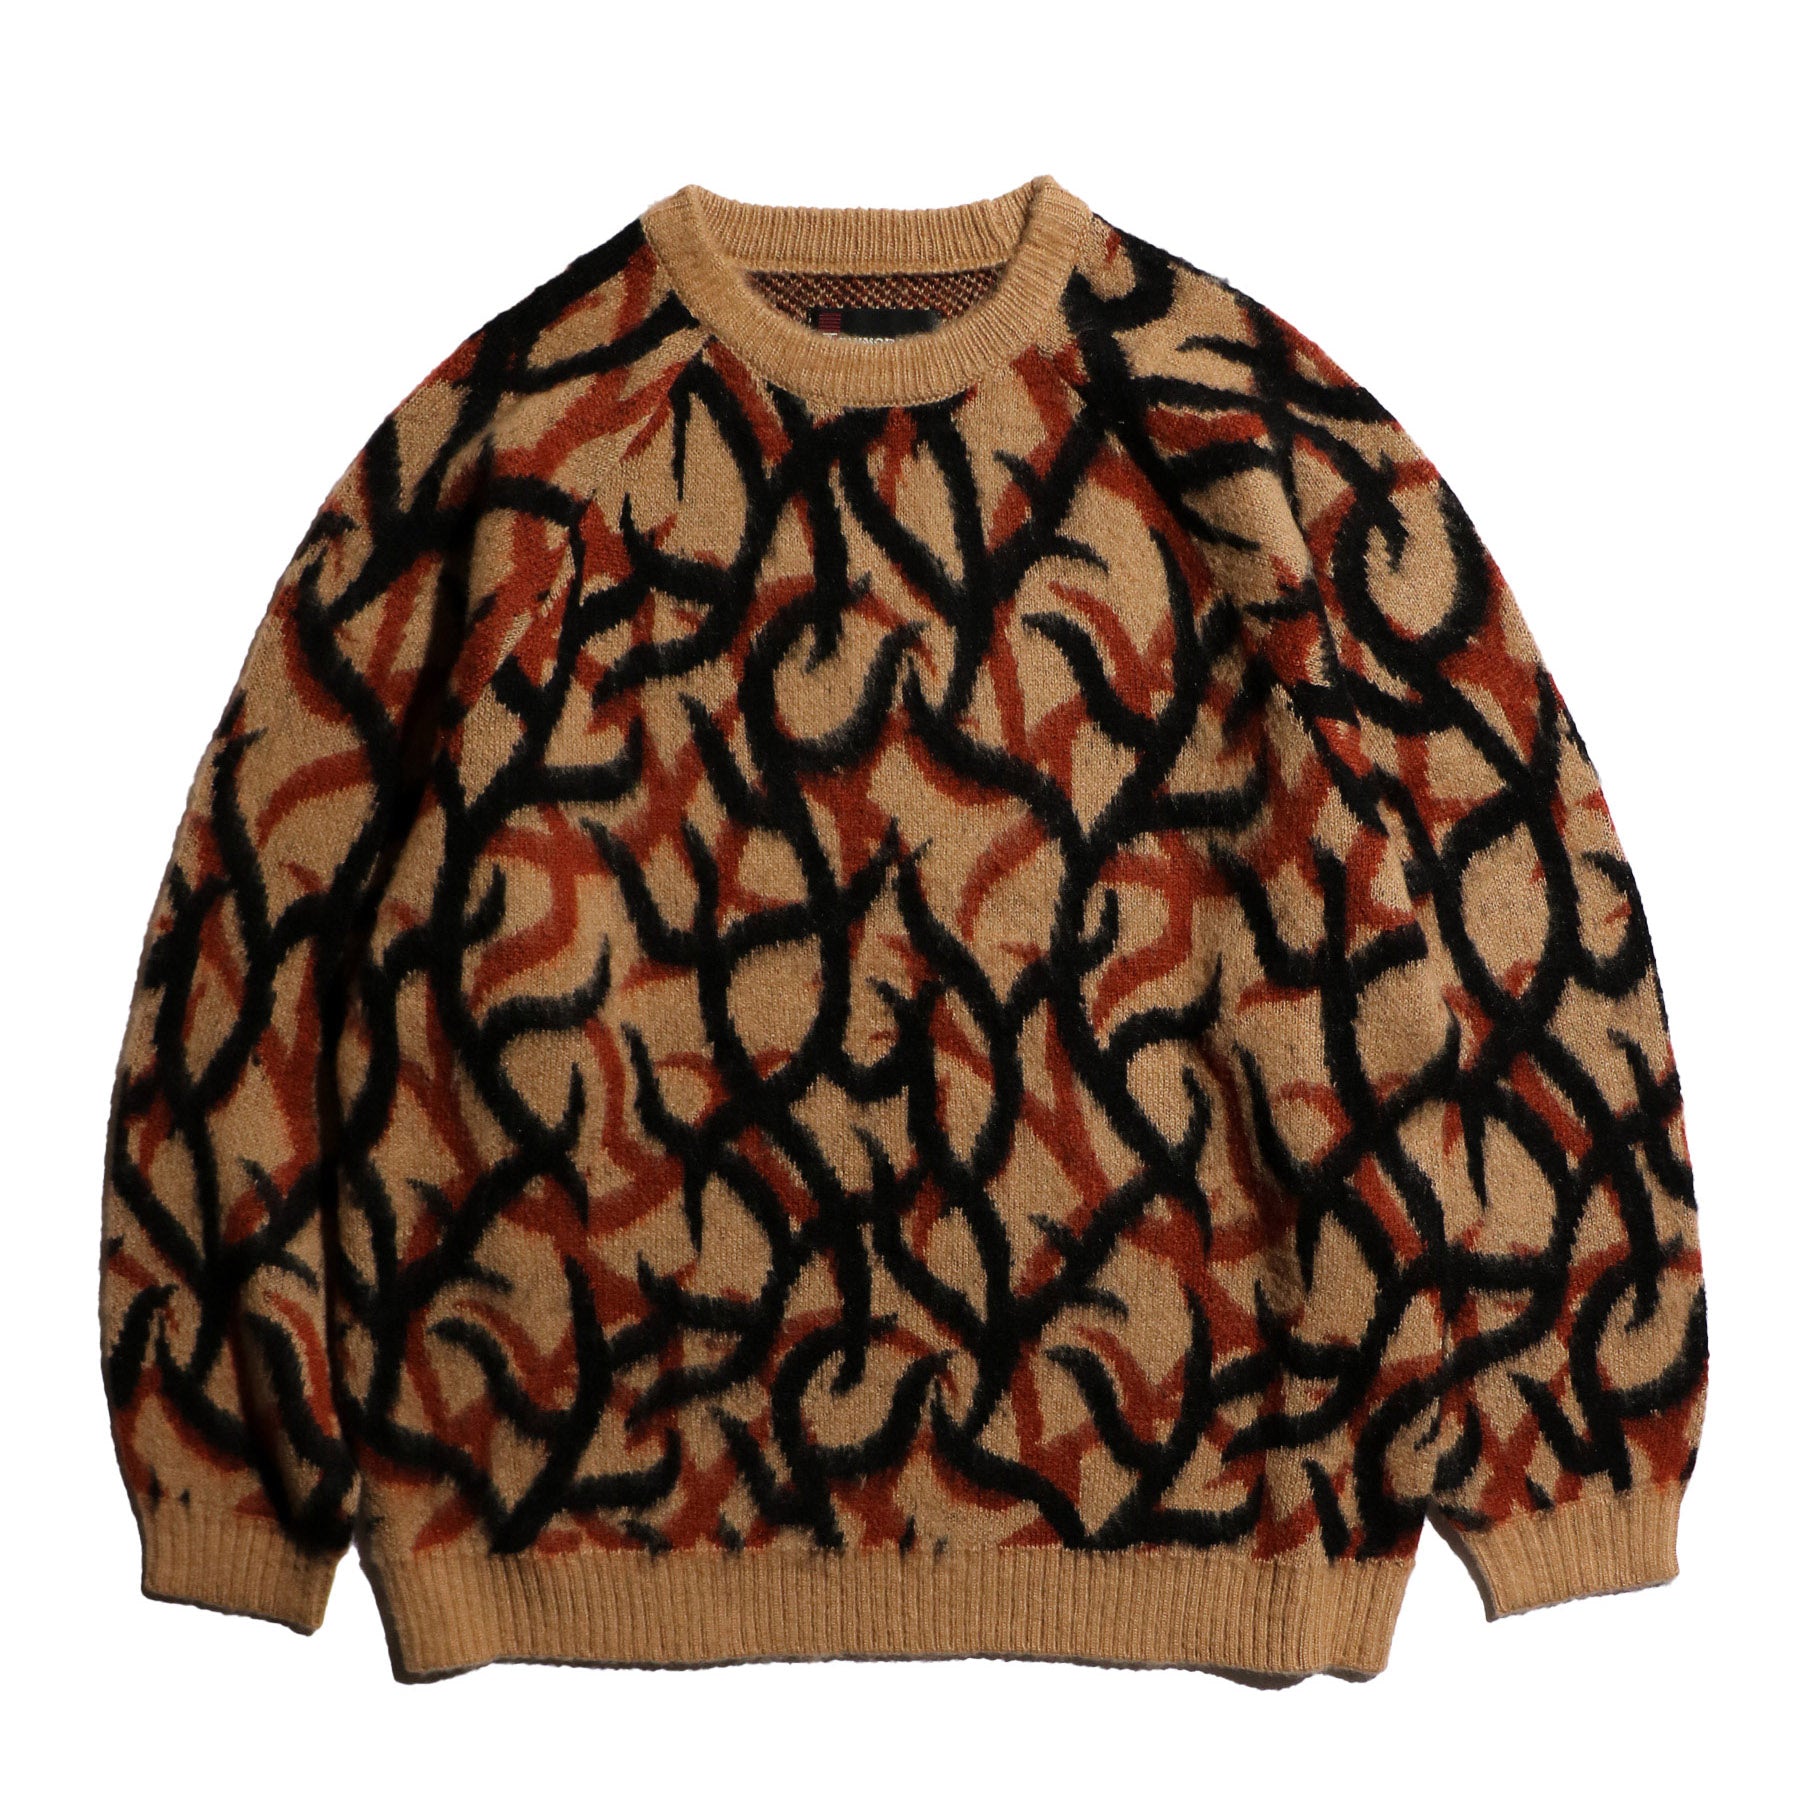 No:tc24f013_Tribal | Name:Shaggy Raglan Crew Sweater | Color:Tribal【TOWNCRAFT_タウンクラフト】【入荷予定アイテム・入荷連絡可能】